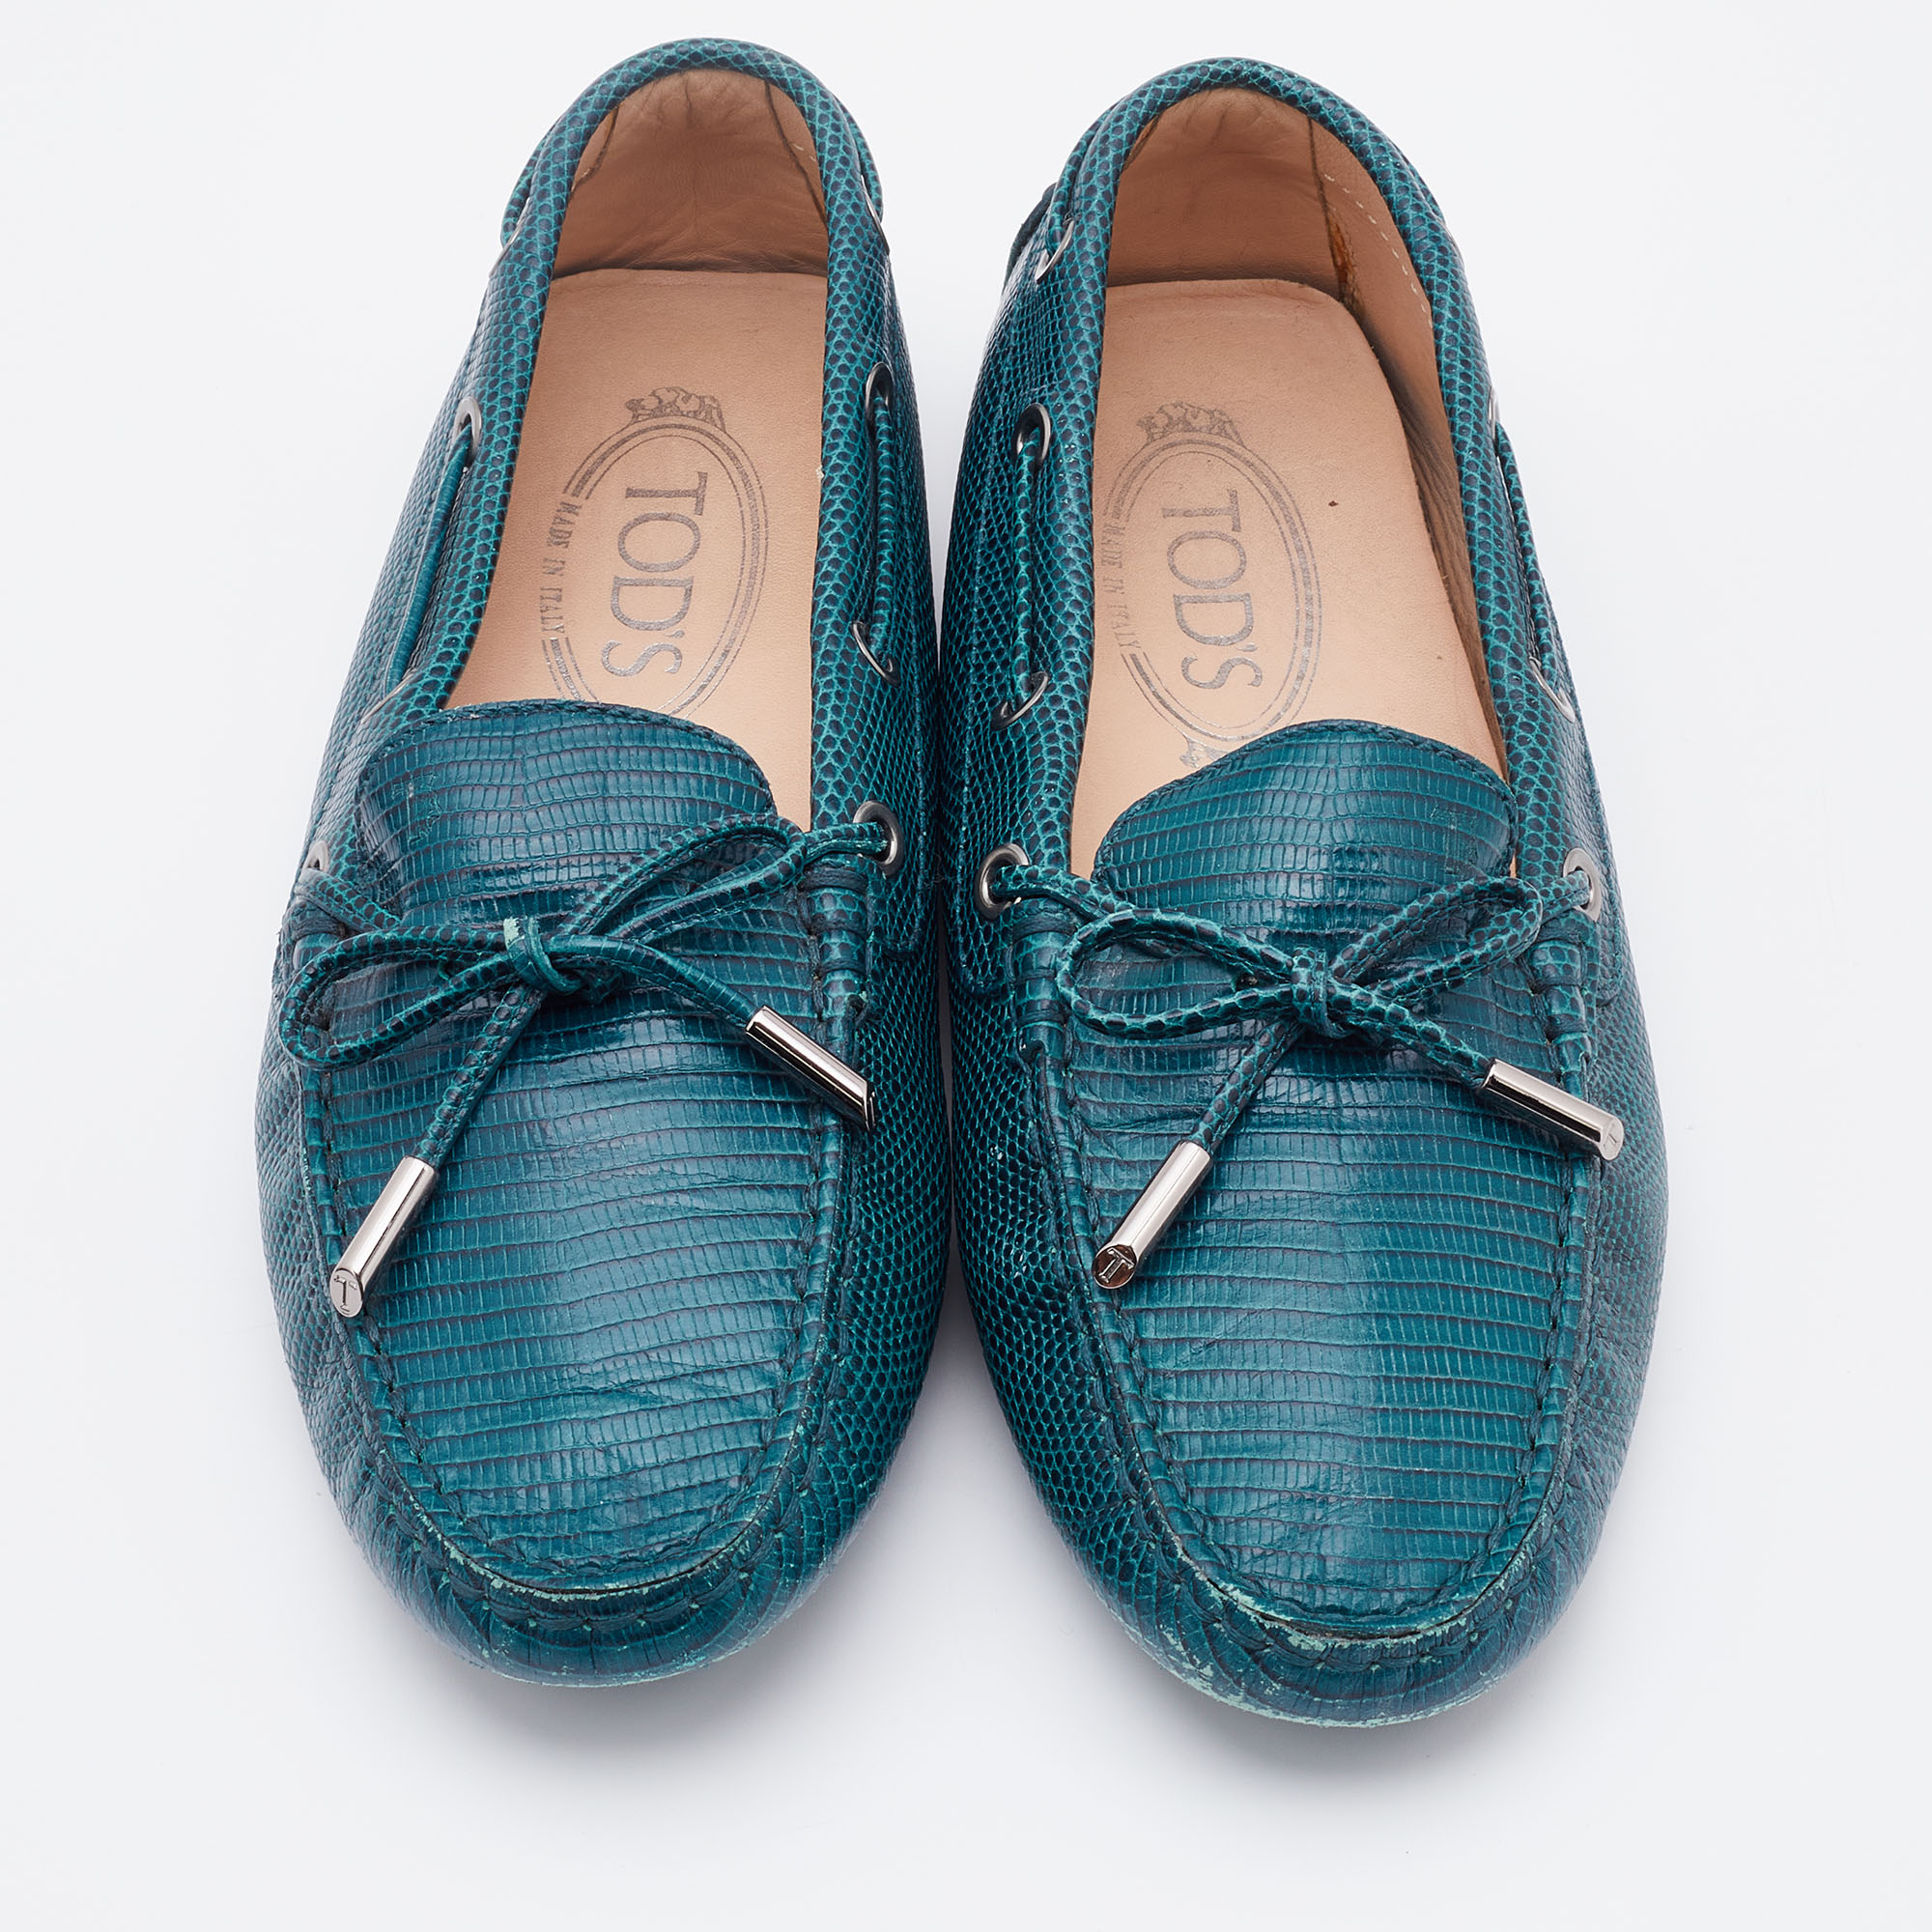 Tod's Teal Blue Lizard Embossed Leather Bow Slip On Loafers Size 37.5